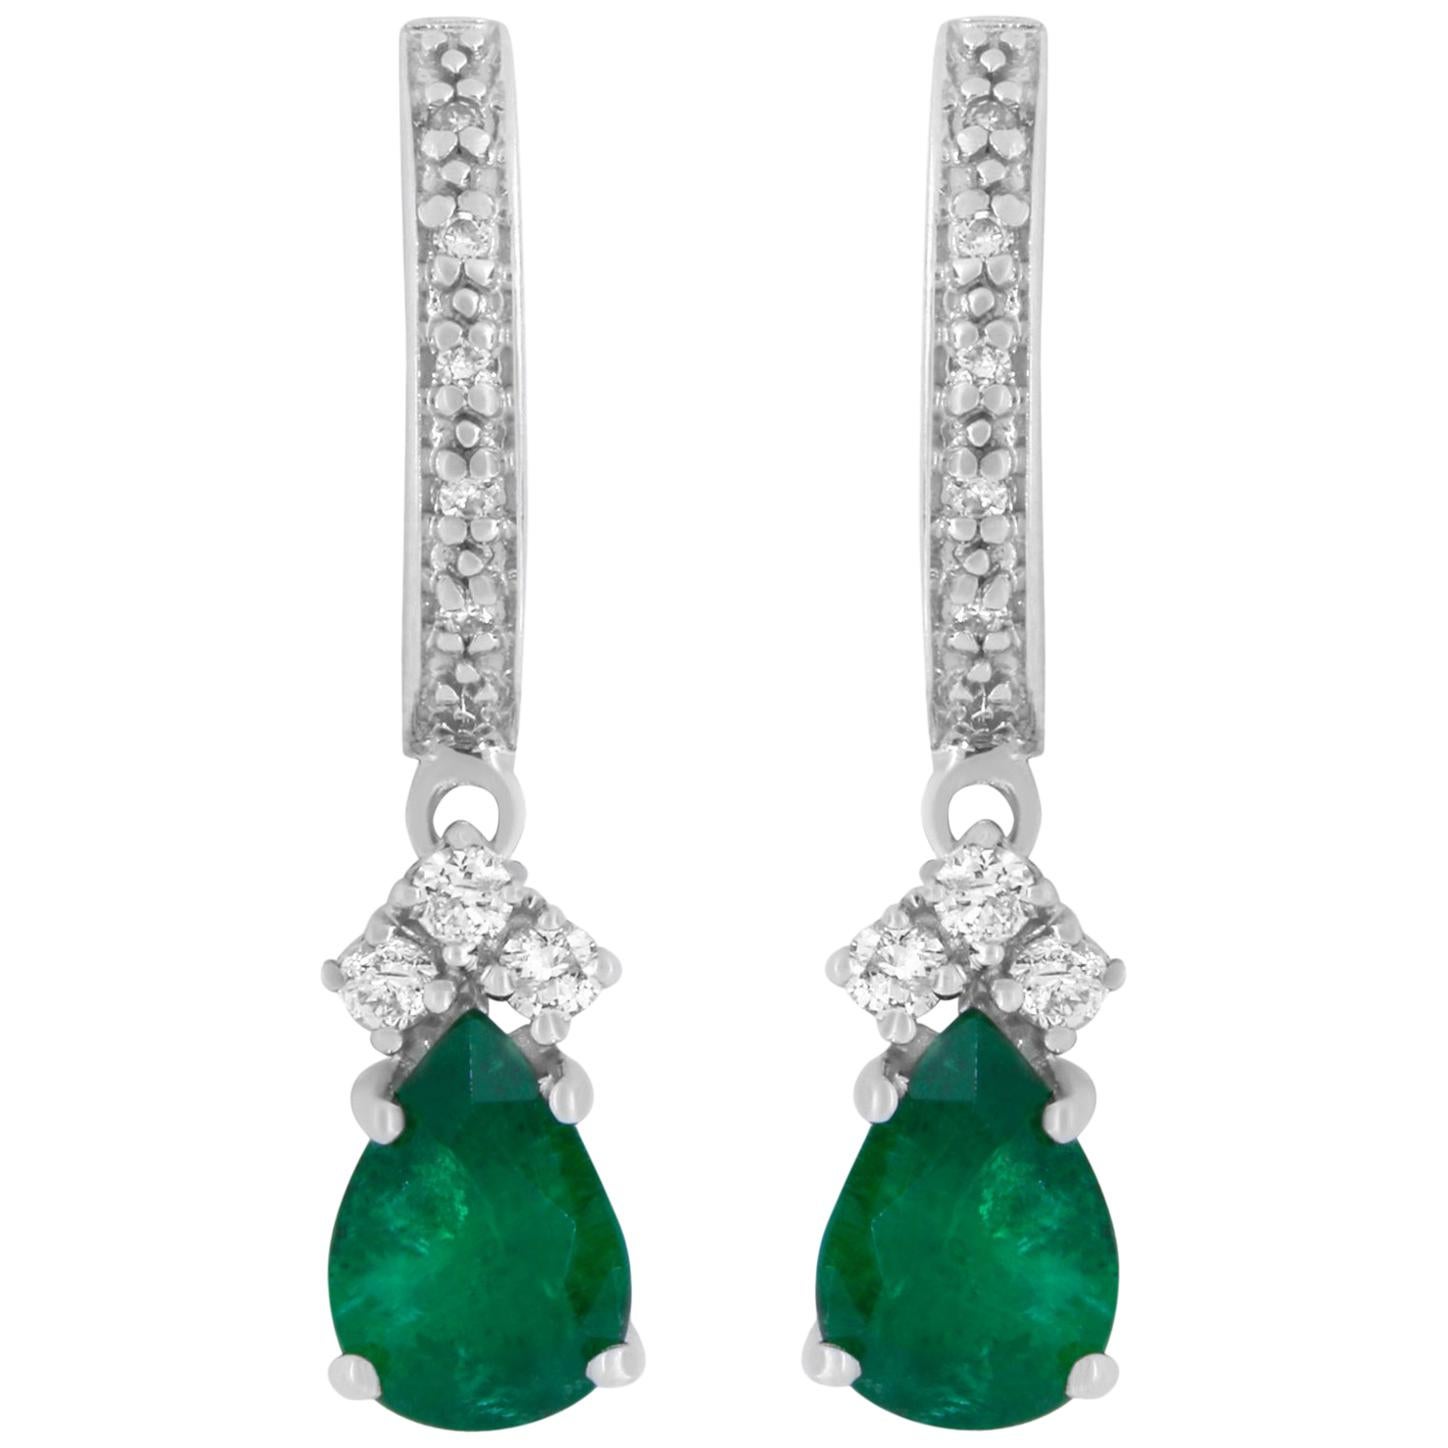 1.25 Carat Pear Shaped Emerald and White Diamond Drop Earring